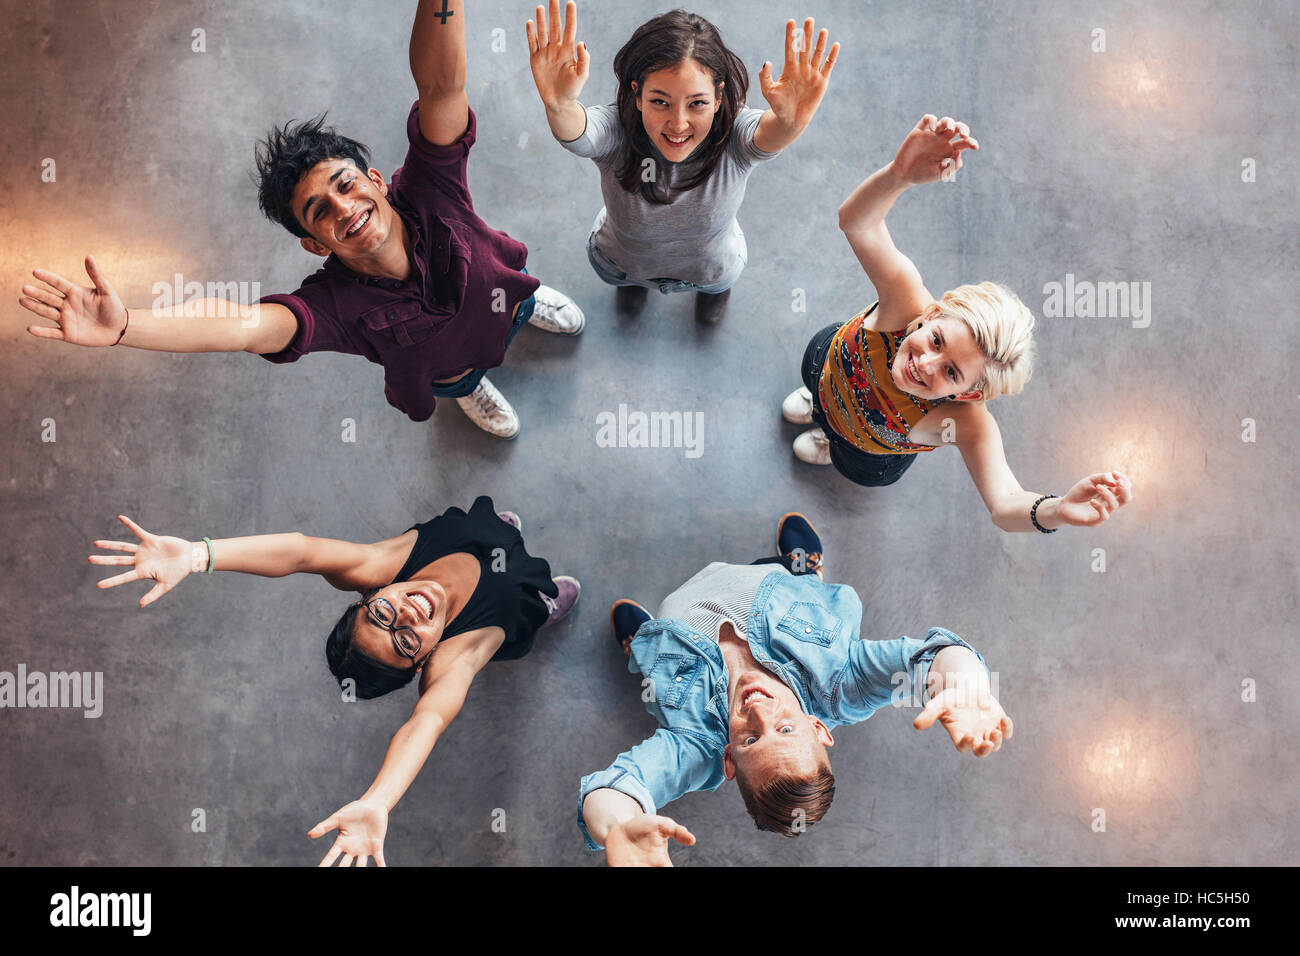 Top view of young students standing together looking up at camera with their hands raised in celebration. Stock Photo